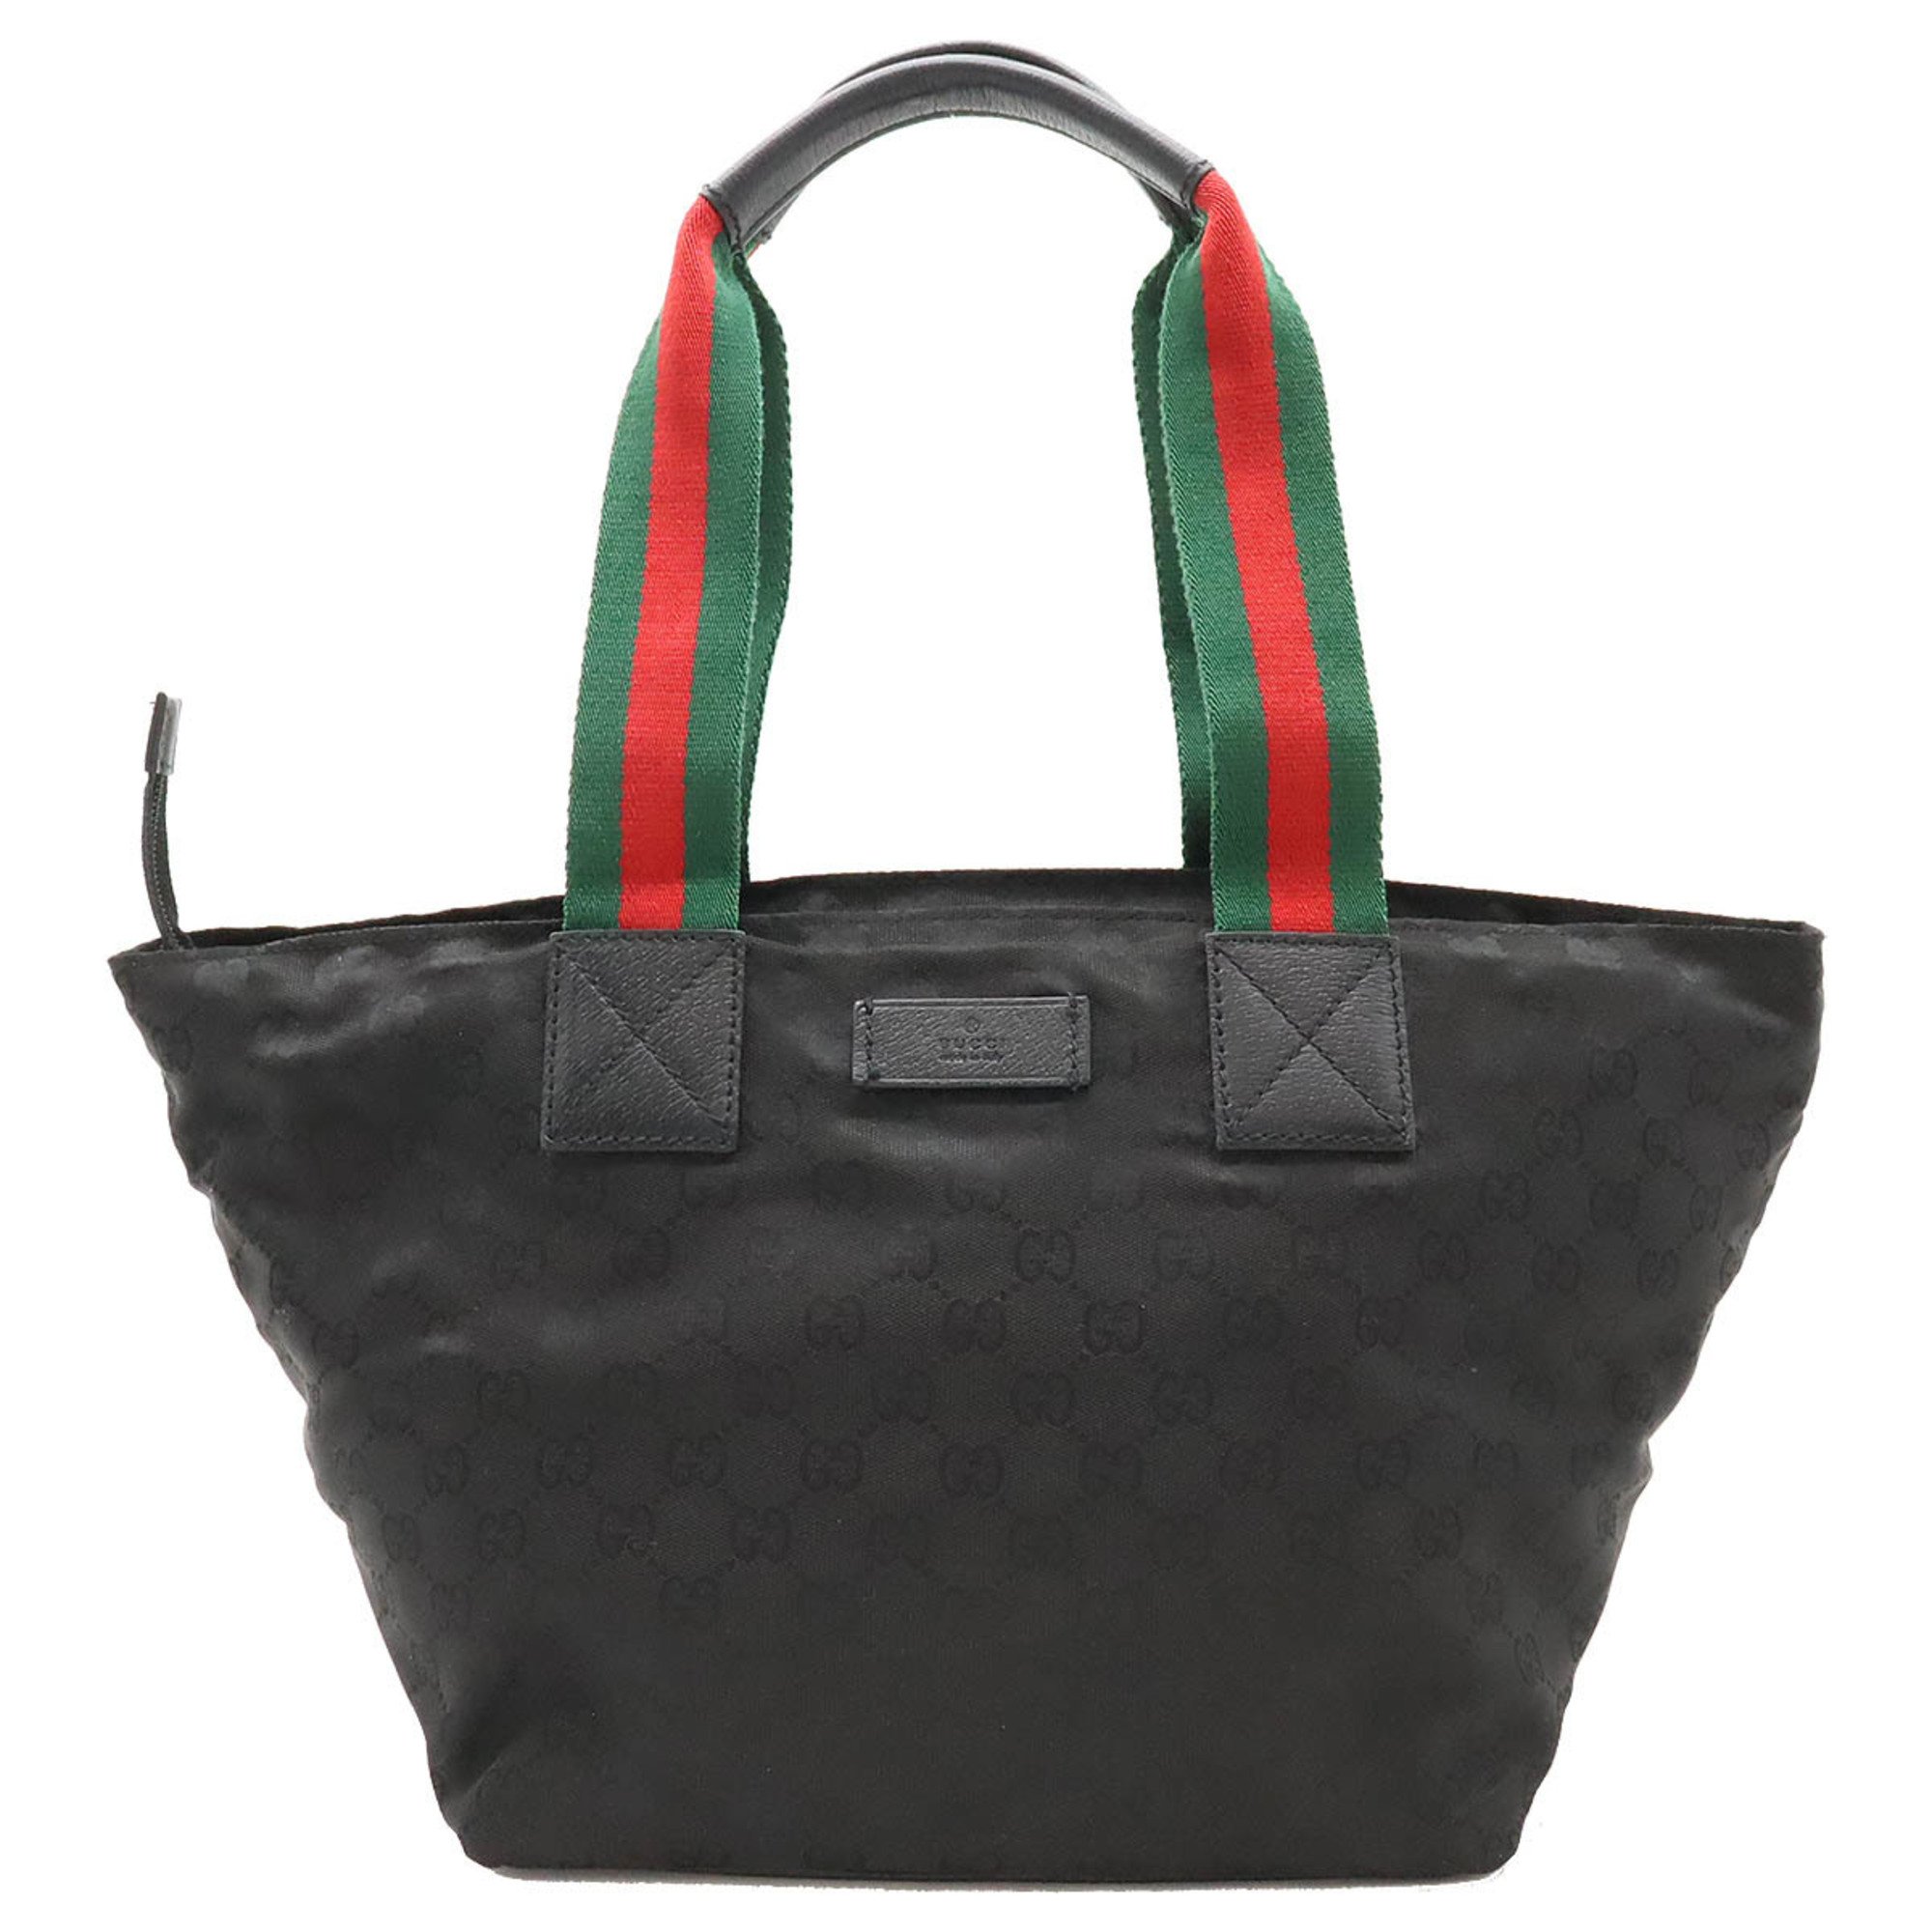 GUCCI GG Nylon Sherry Line Tote Bag Shoulder Canvas Leather Black Green Red 131230